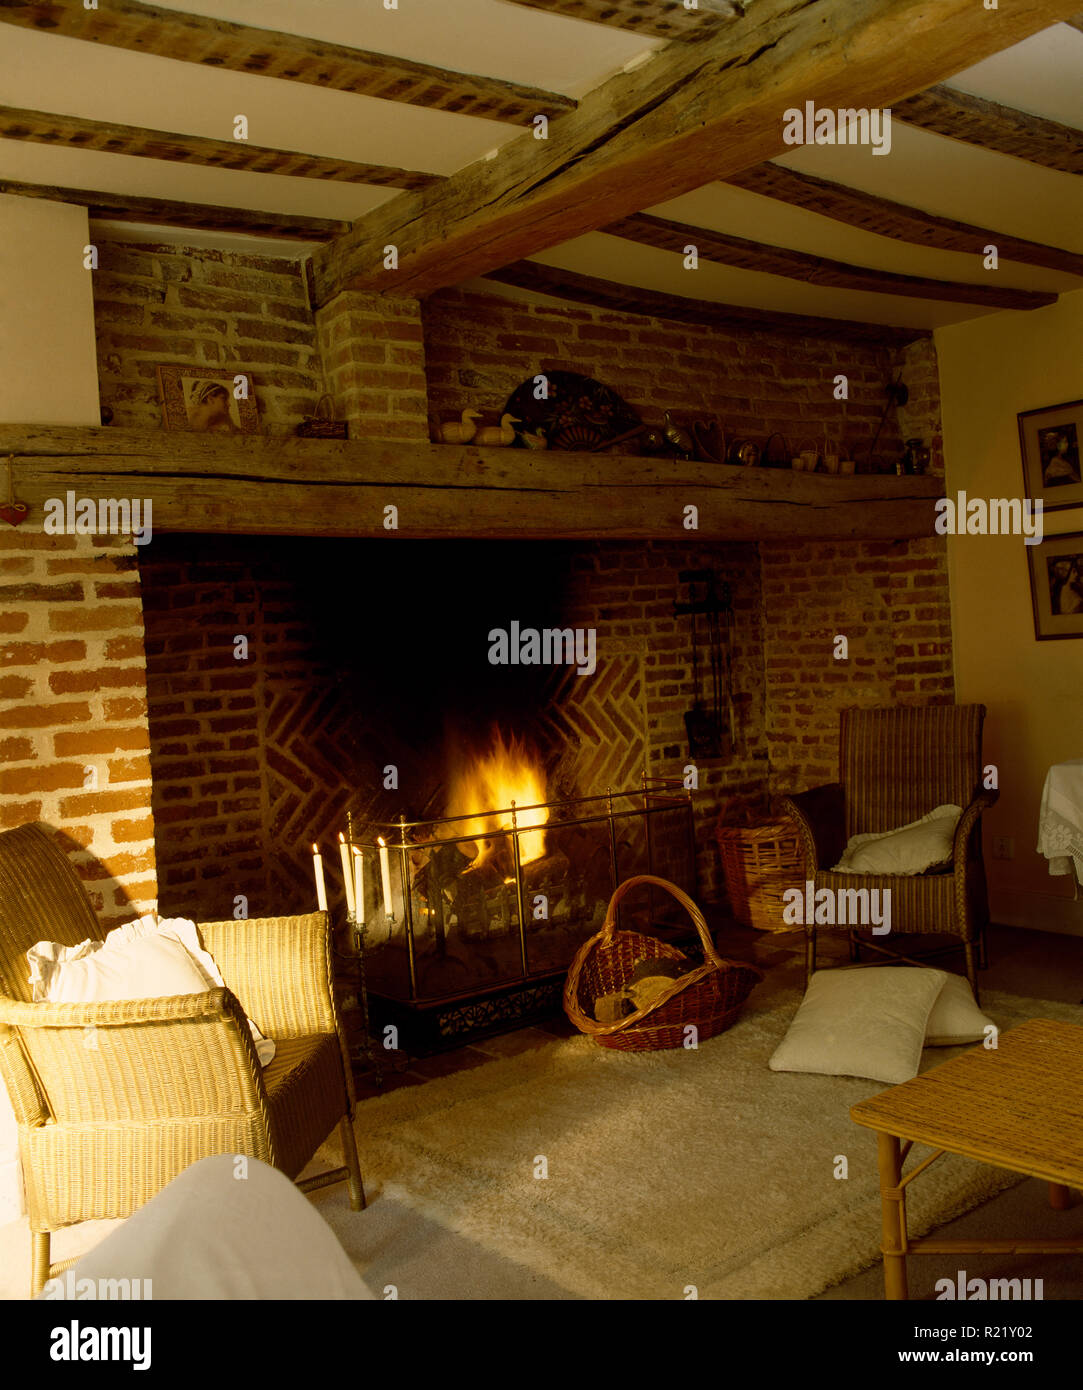 Inglenook fireplace with lighted fire in country sitting room Stock Photo